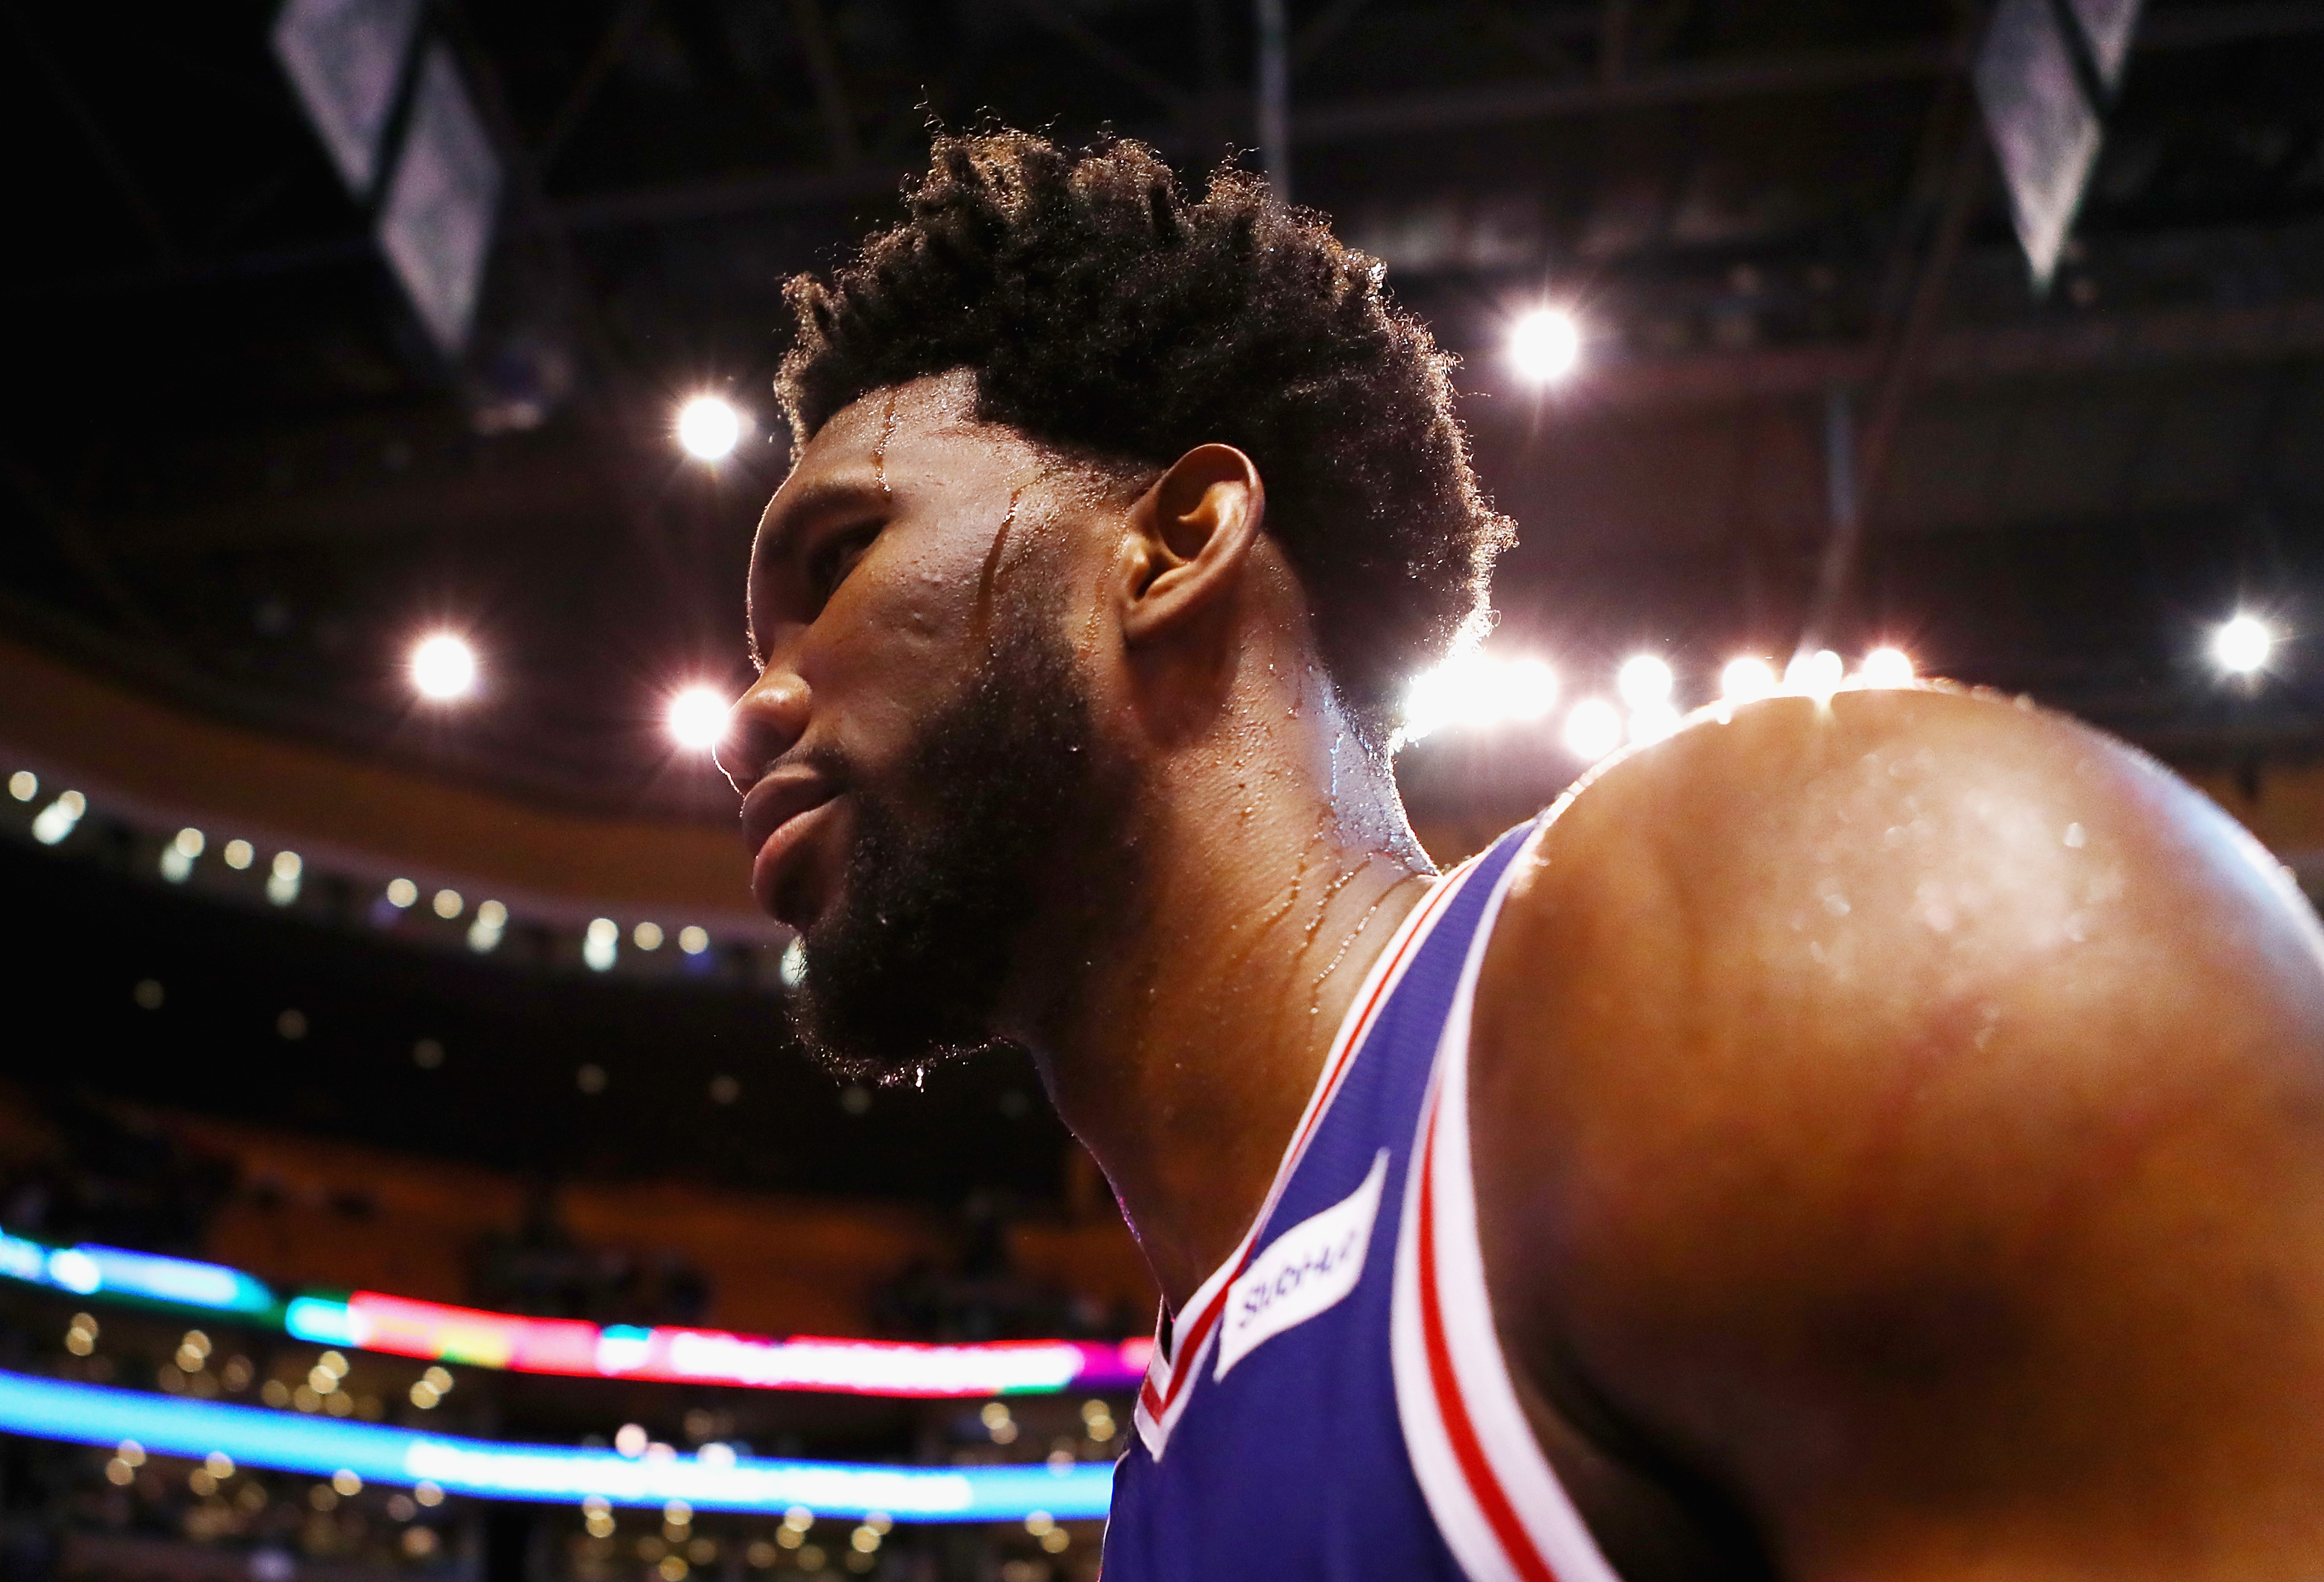 NBA: Top prospect Embiid has stress fracture in foot